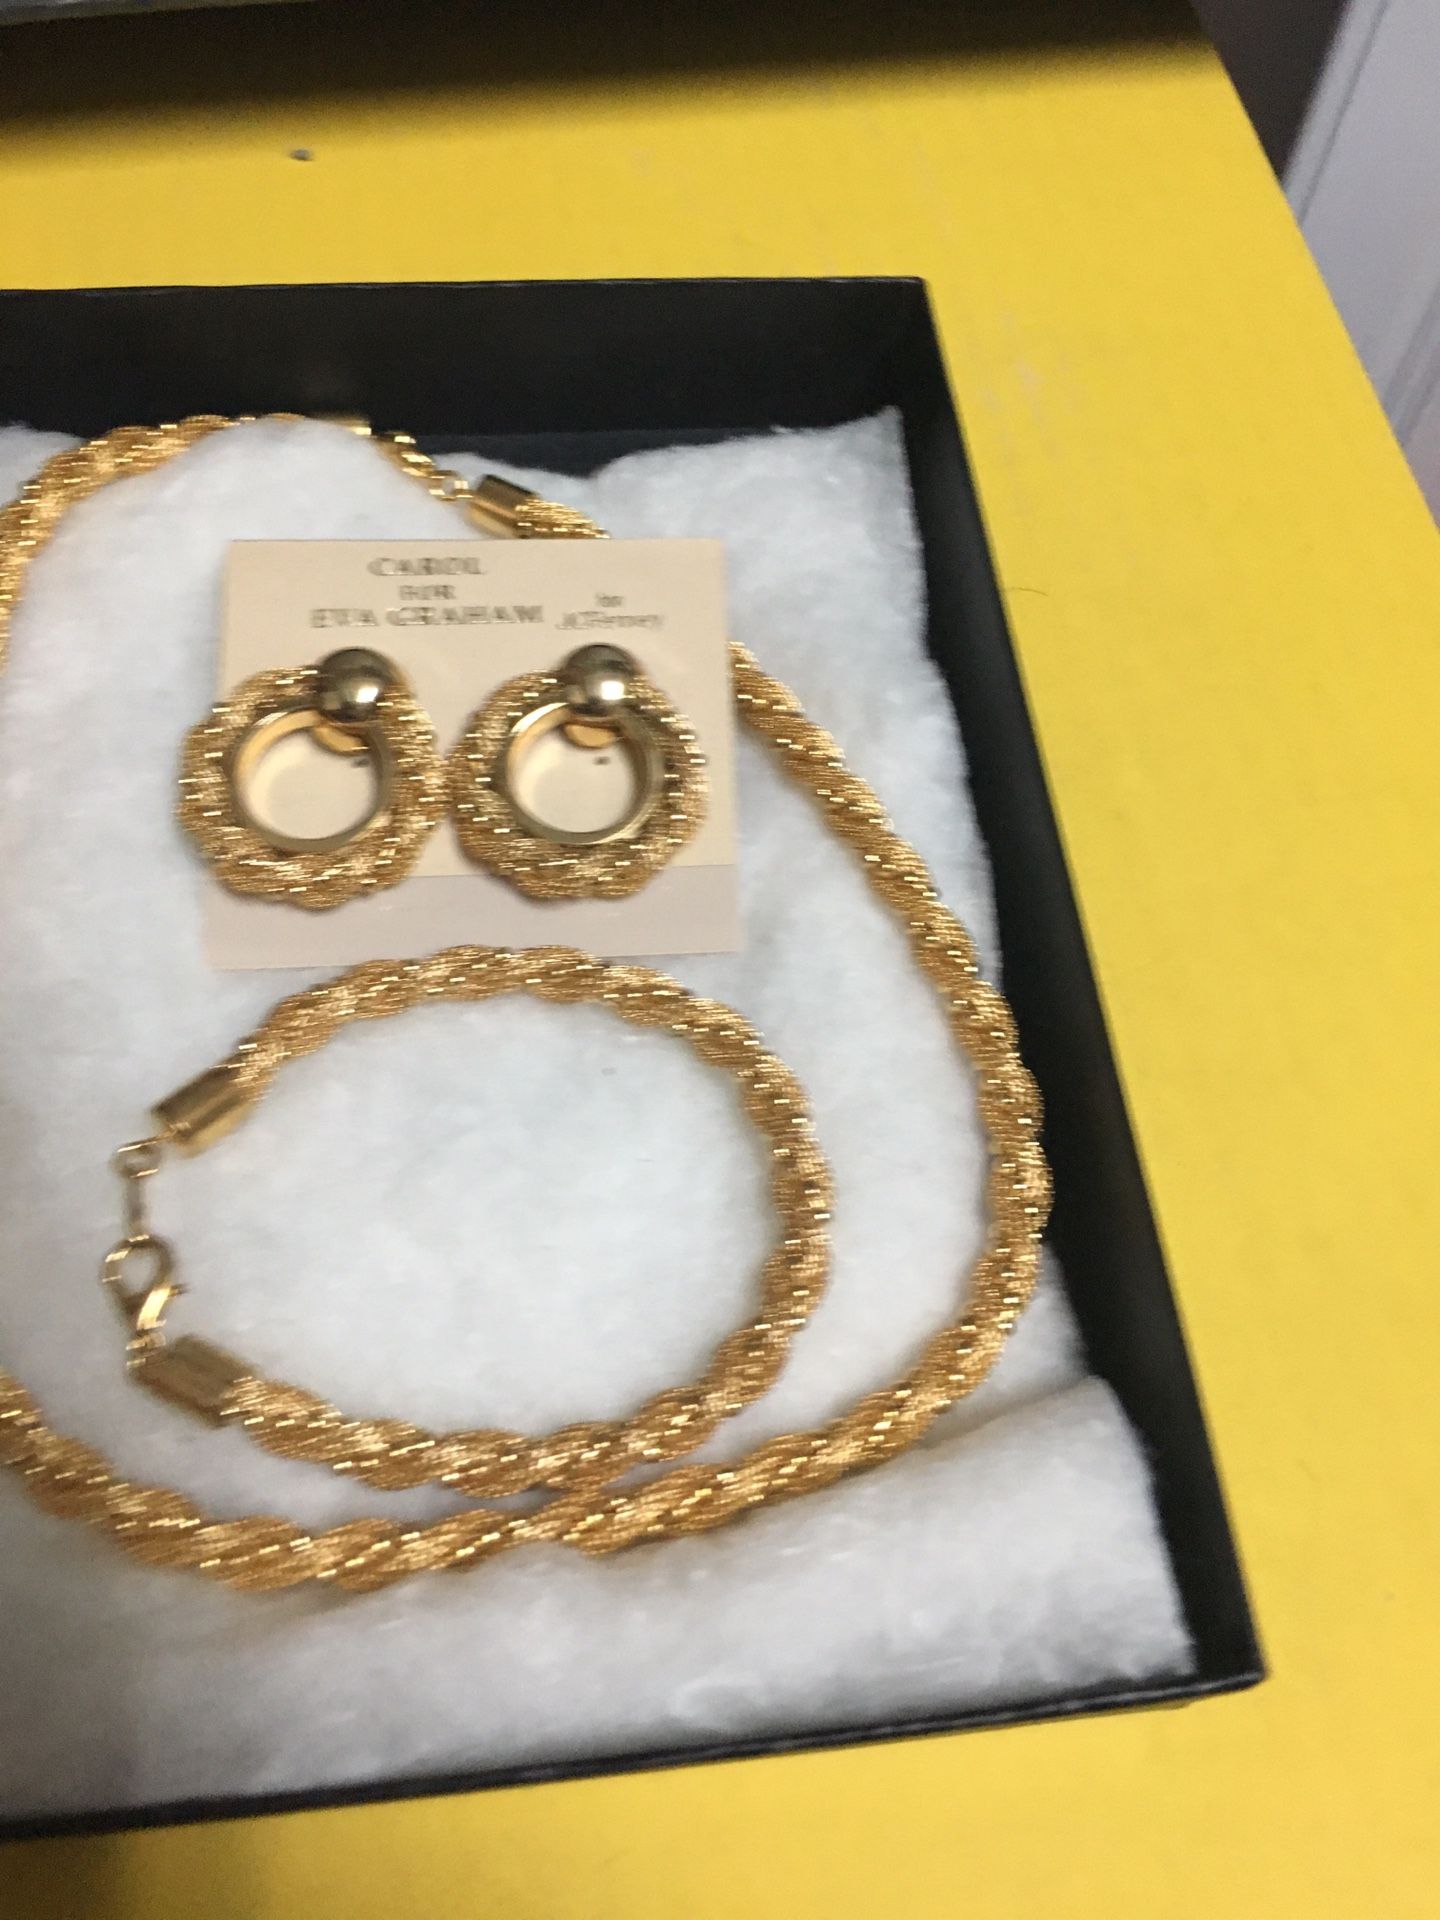 3 Piece Gold Tone Jewelry Set: Earrings, Bracelet, and Necklace